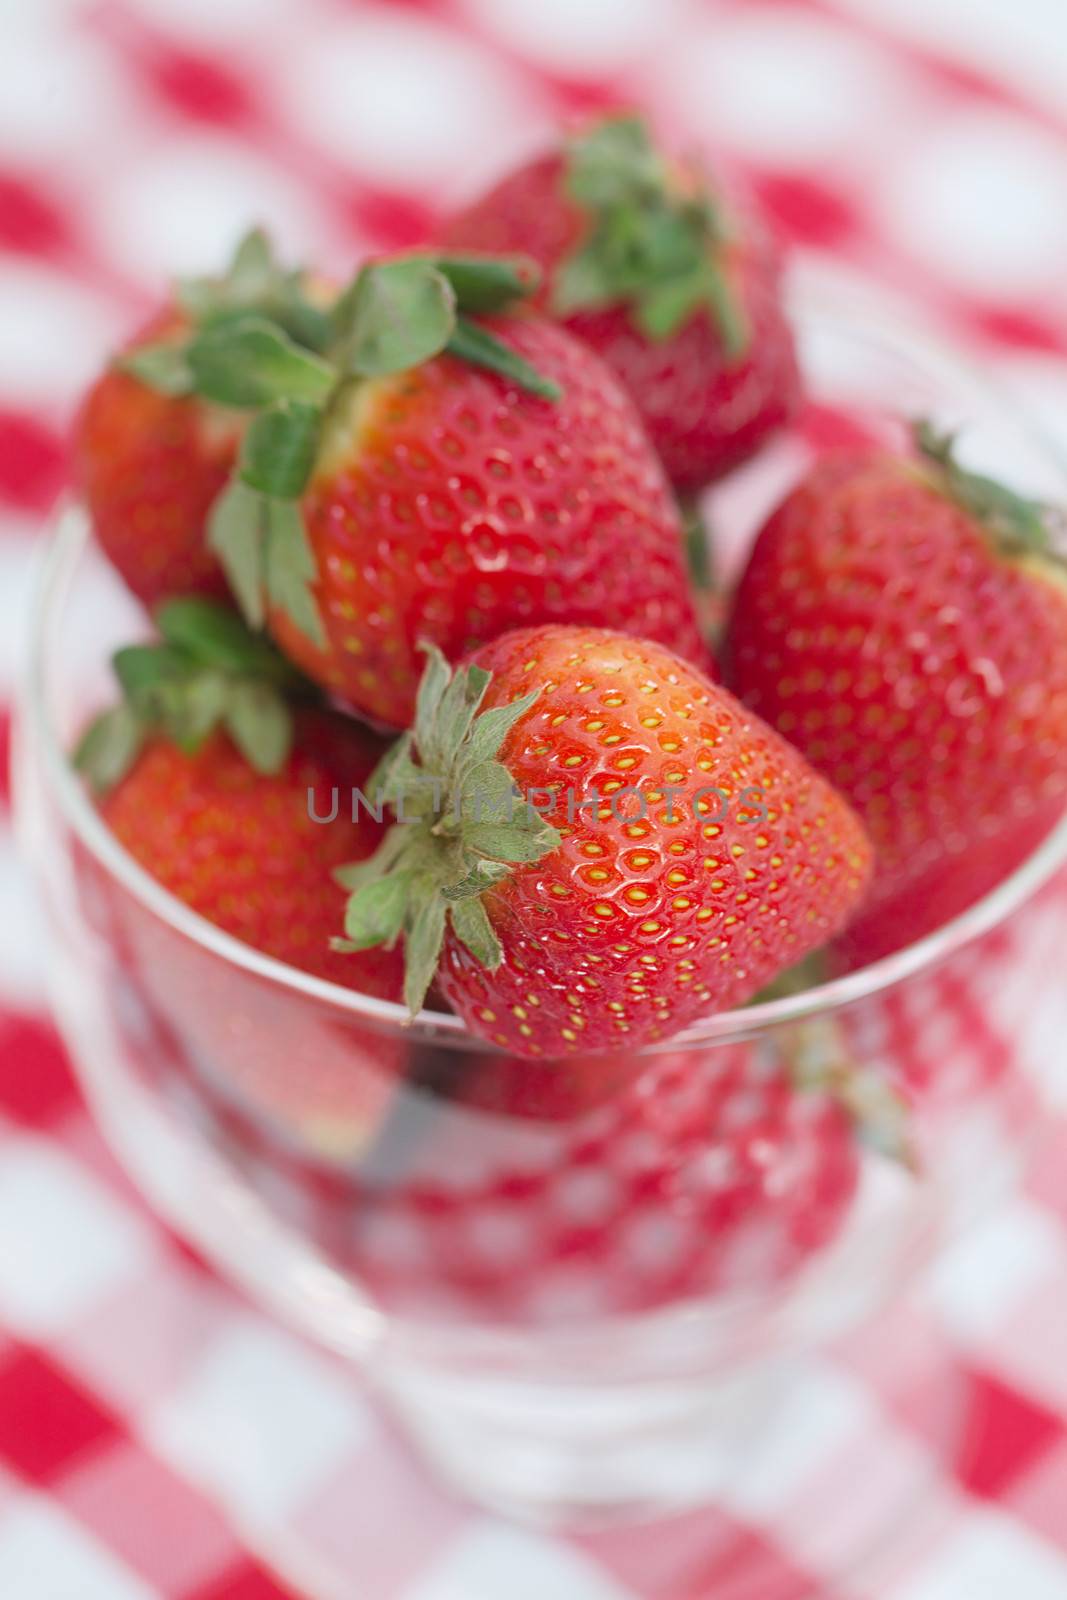 strawberry in a glass bowl on checkered fabric